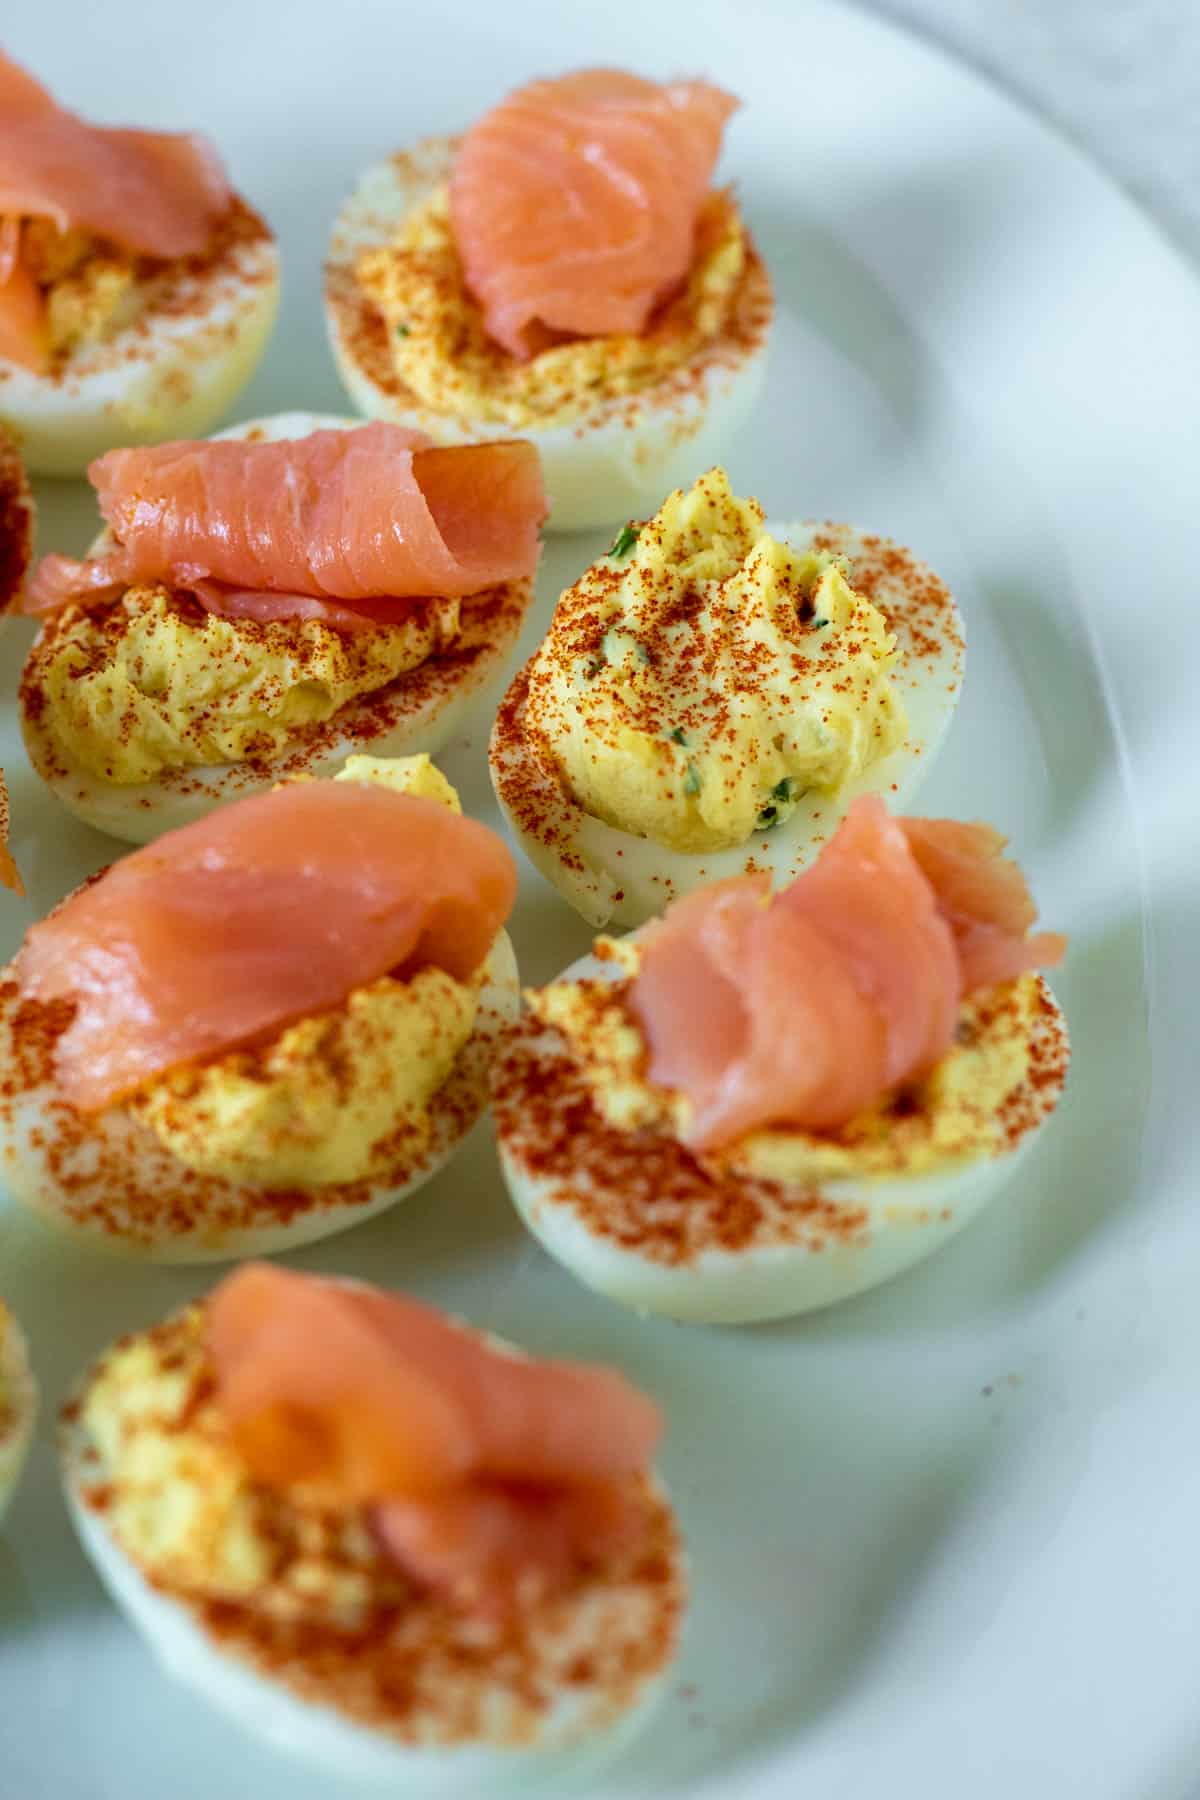 Platter of deviled eggs, both plain and with smoked salmon.